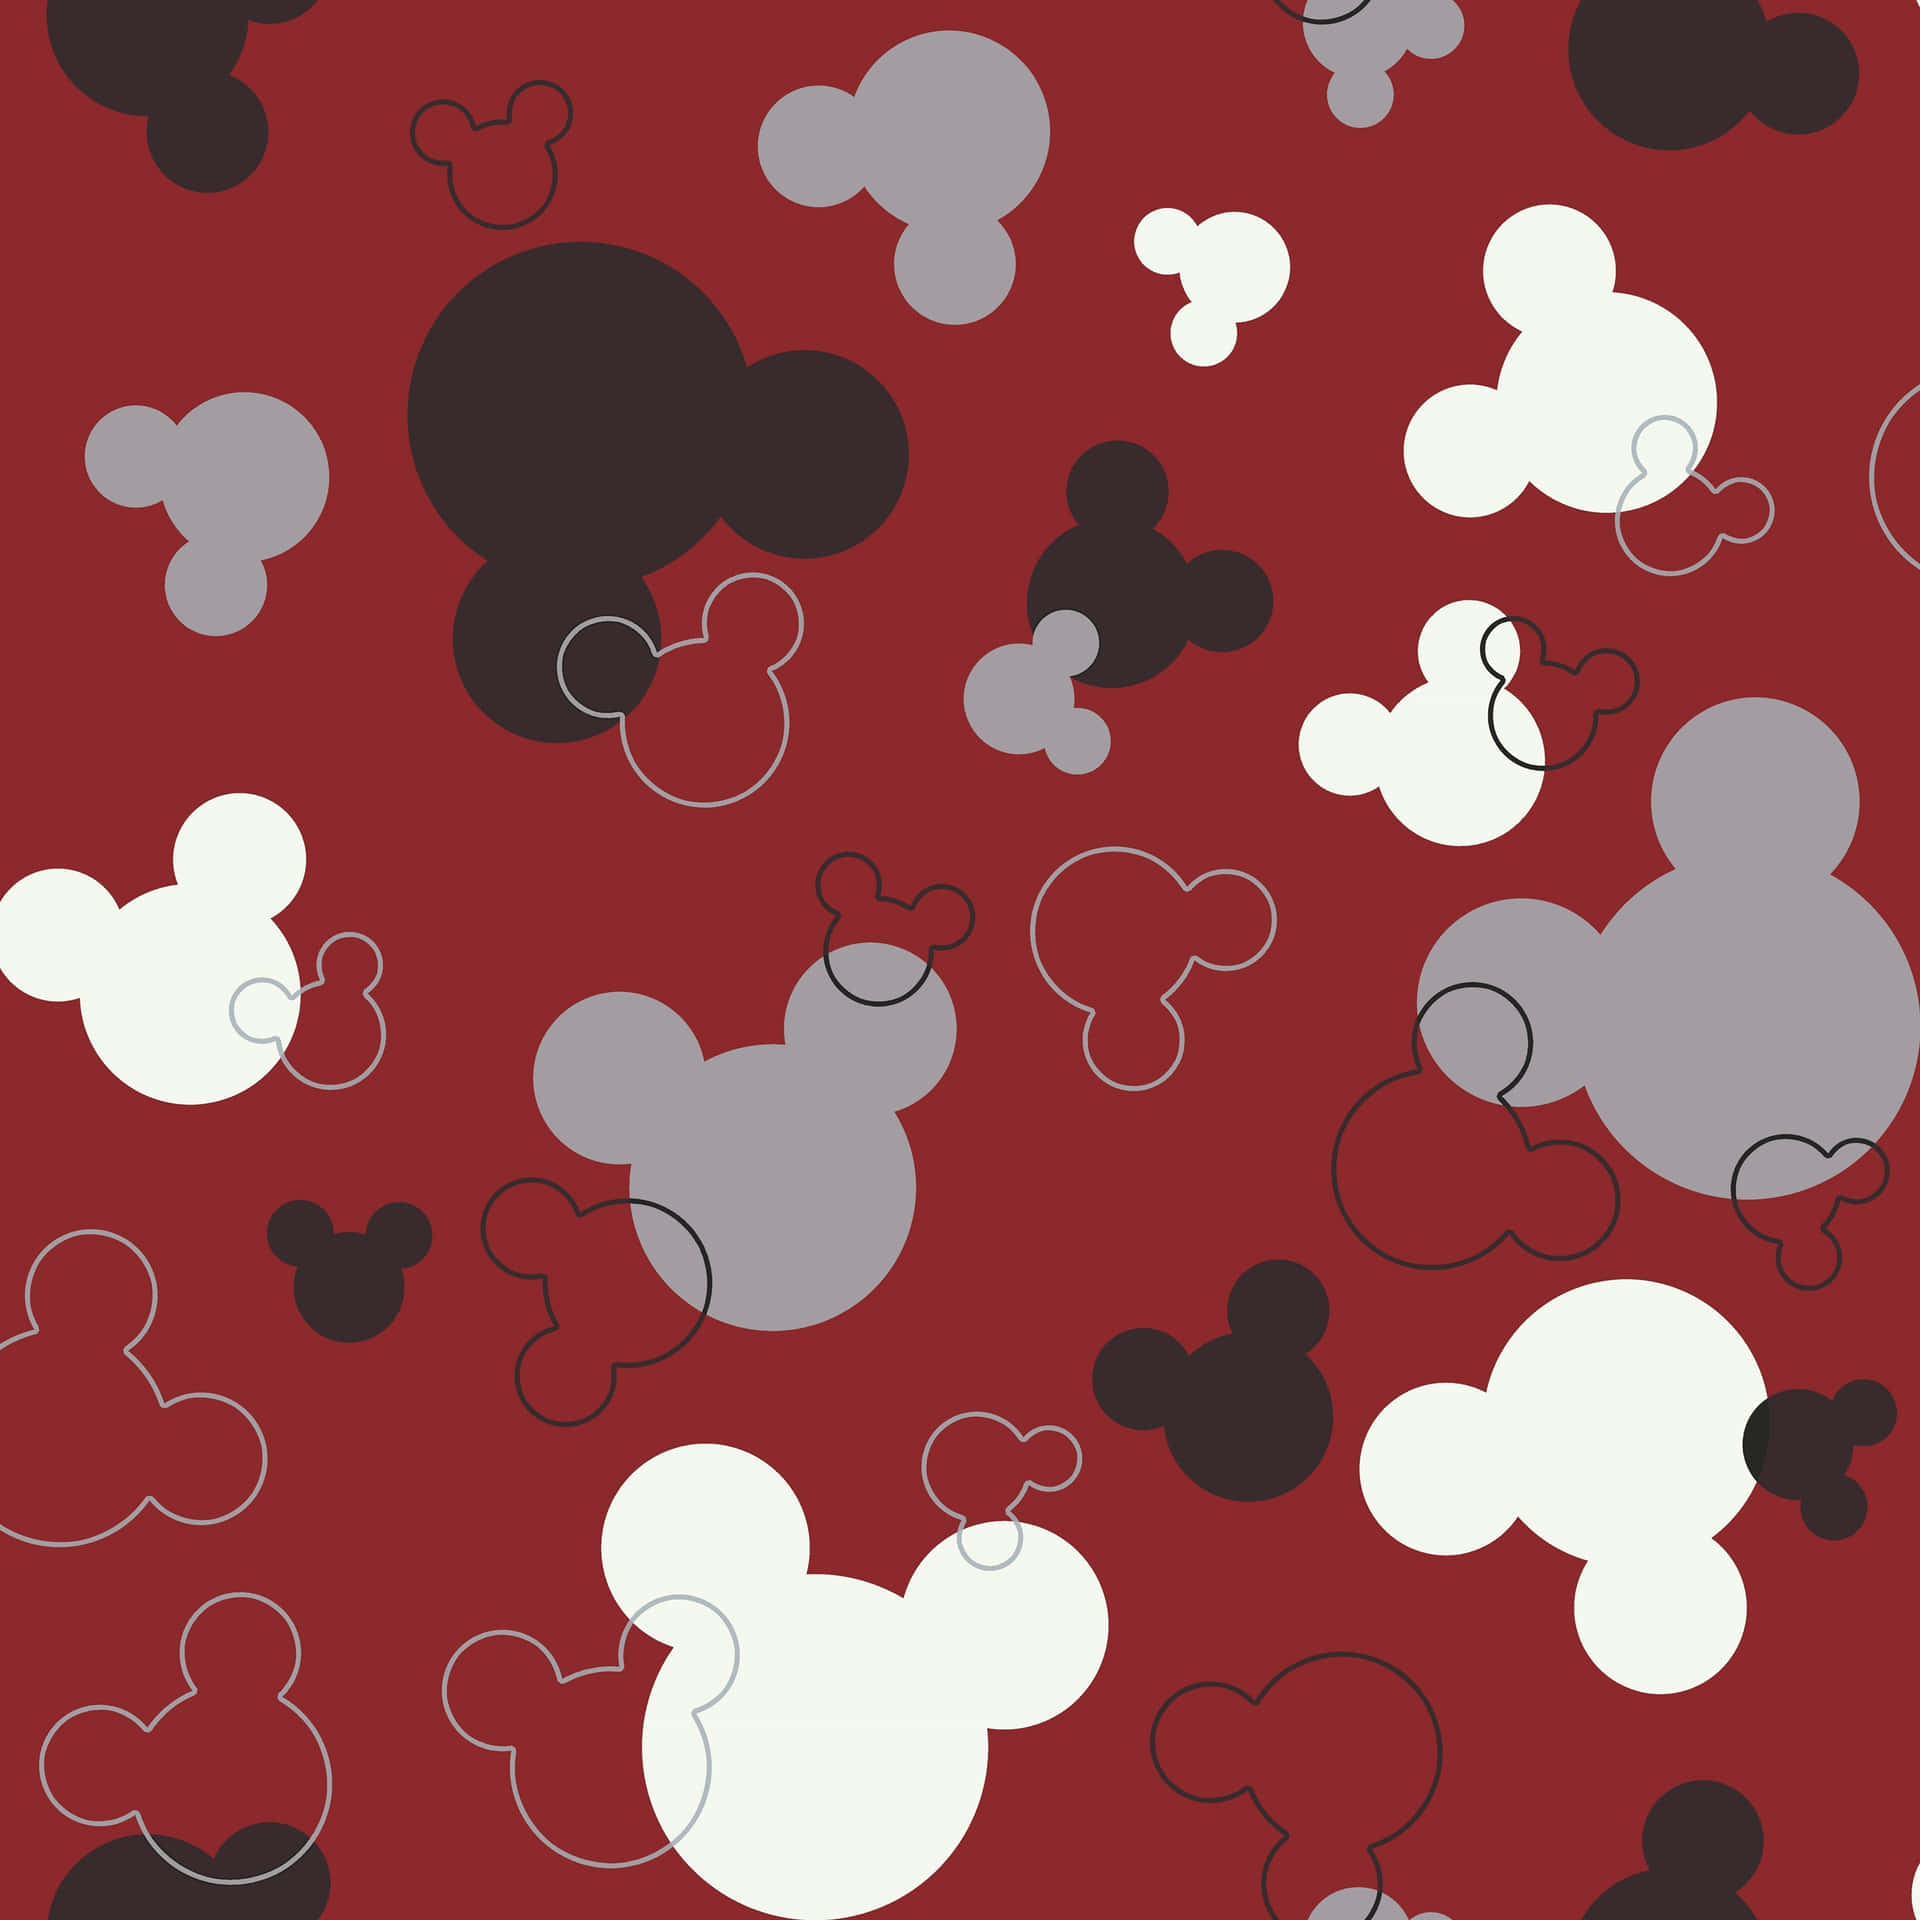 Mickey Mouse Ears Are The Symbol Of Joy And Fun Wallpaper